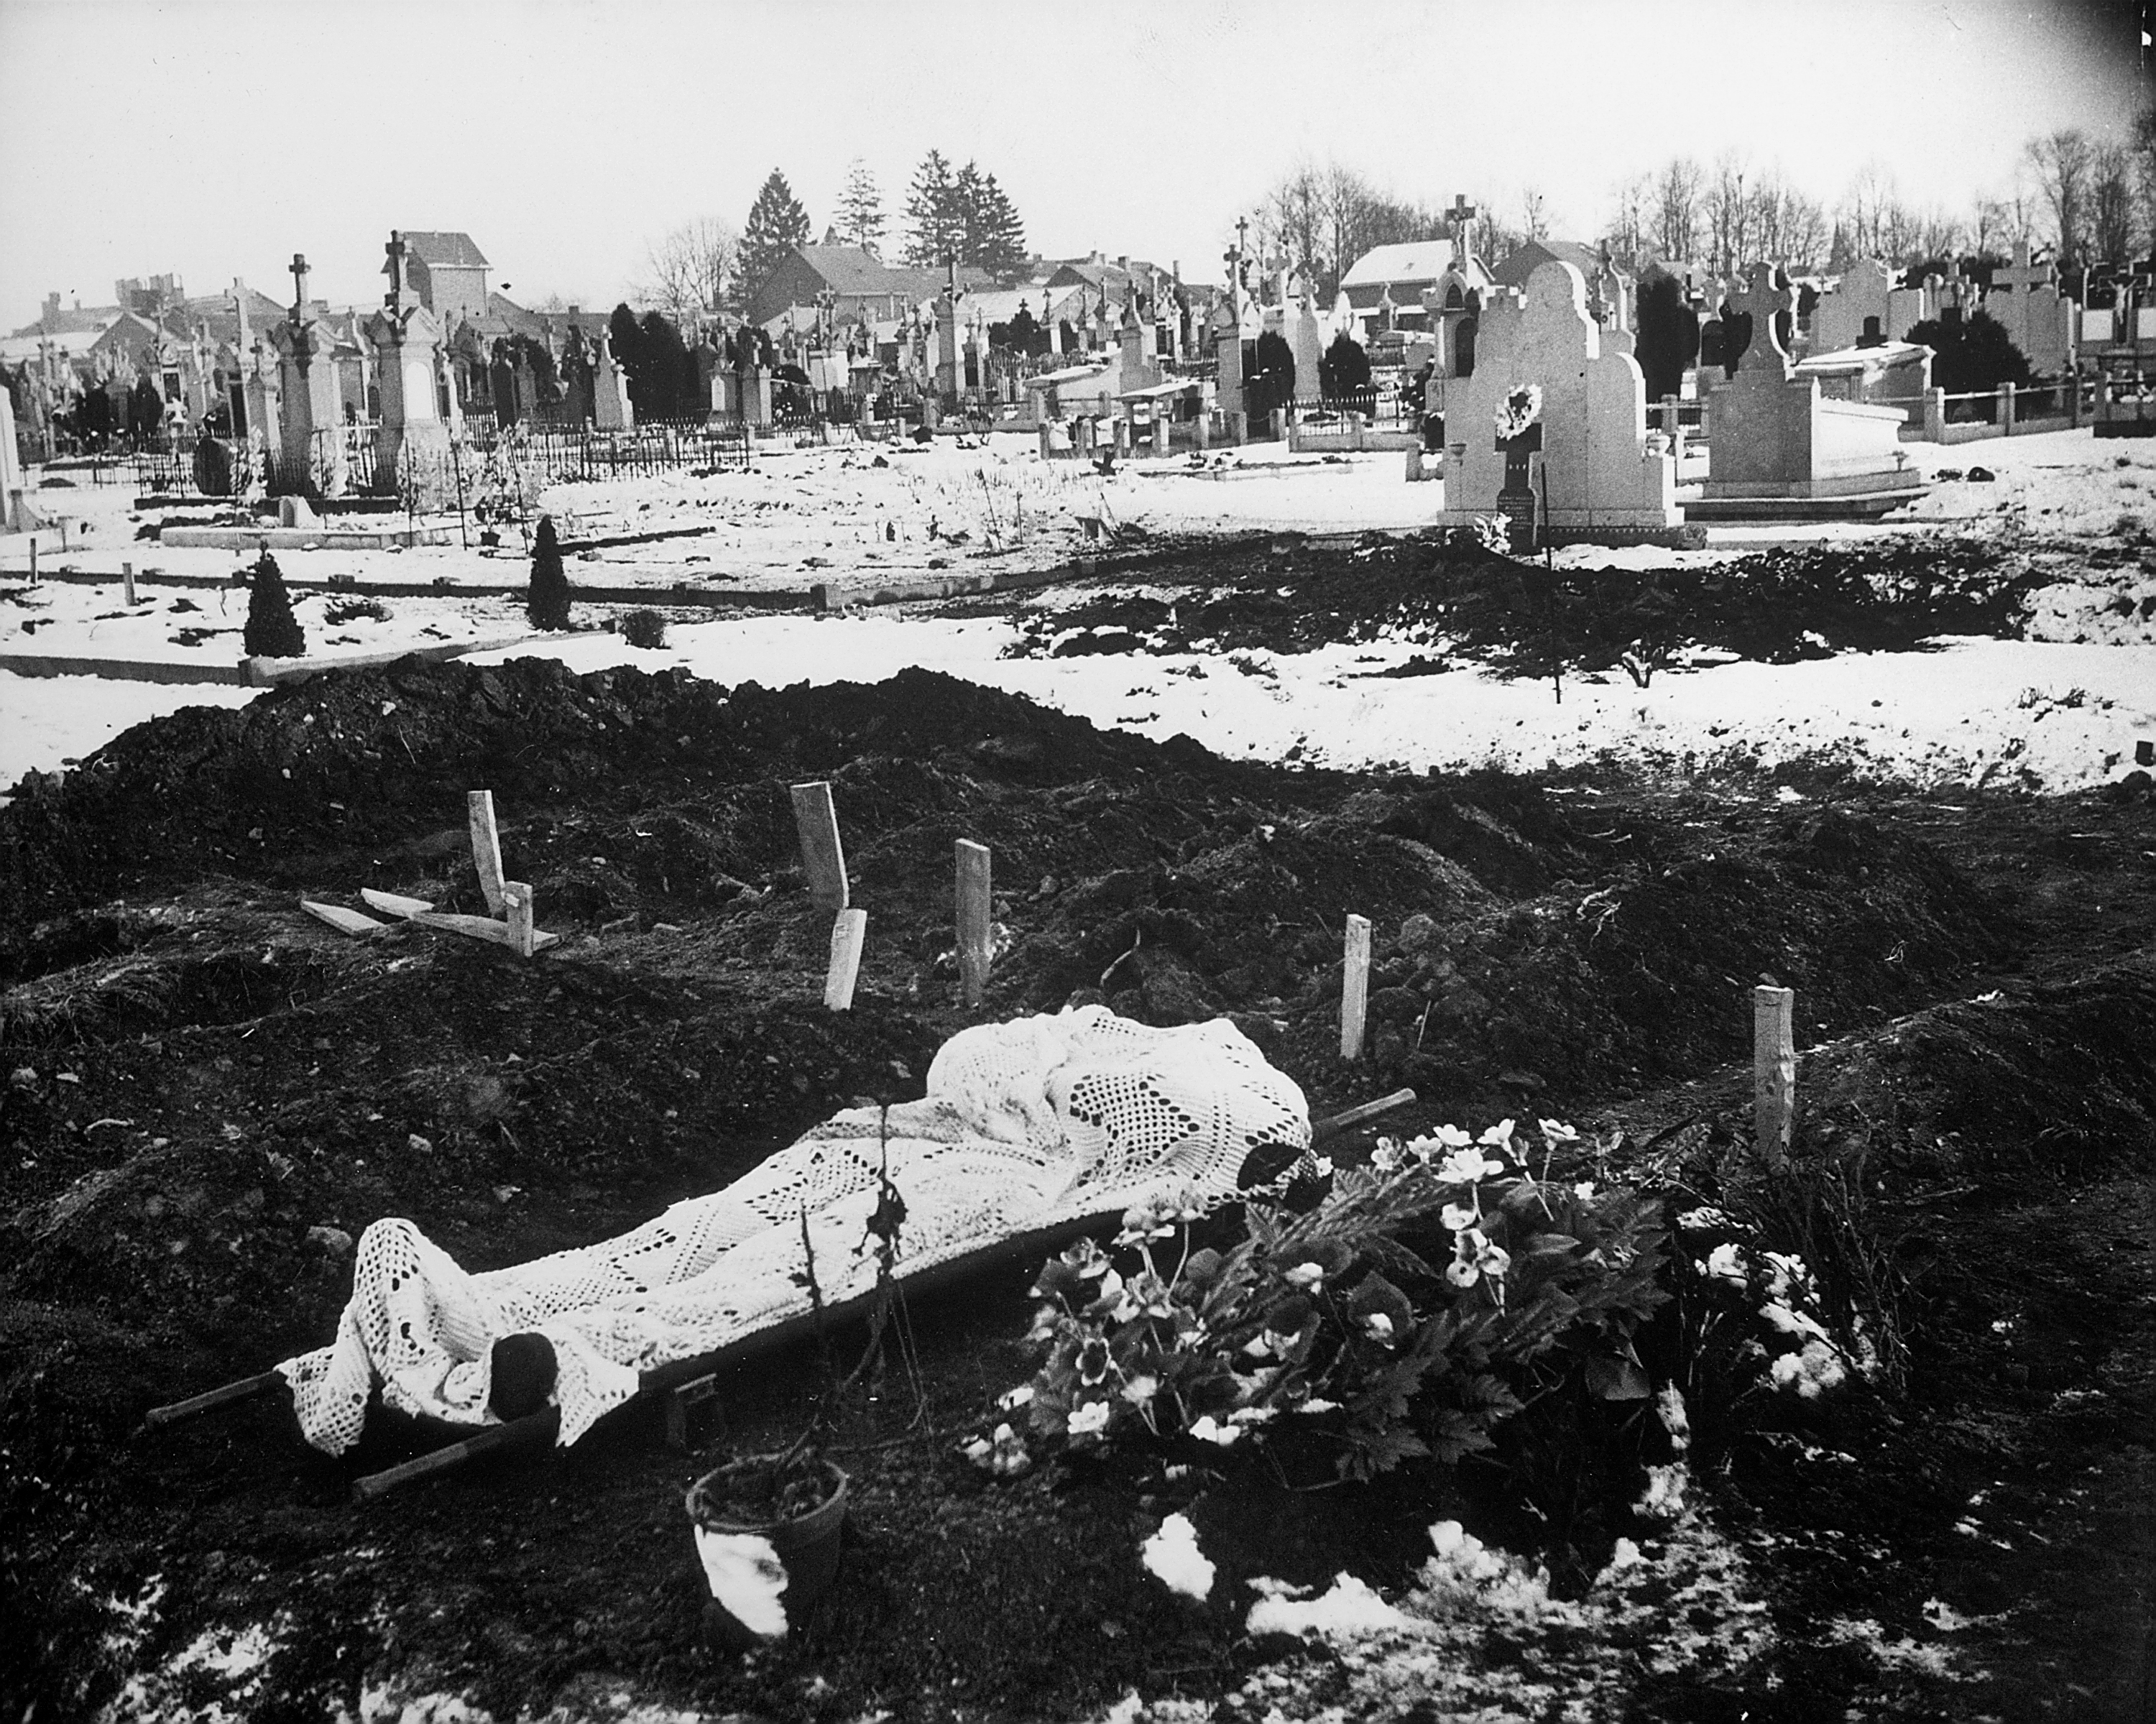 Lace curtain shrouds body of an American soldier awaiting burial in Bastogne cemetery, January 1945.